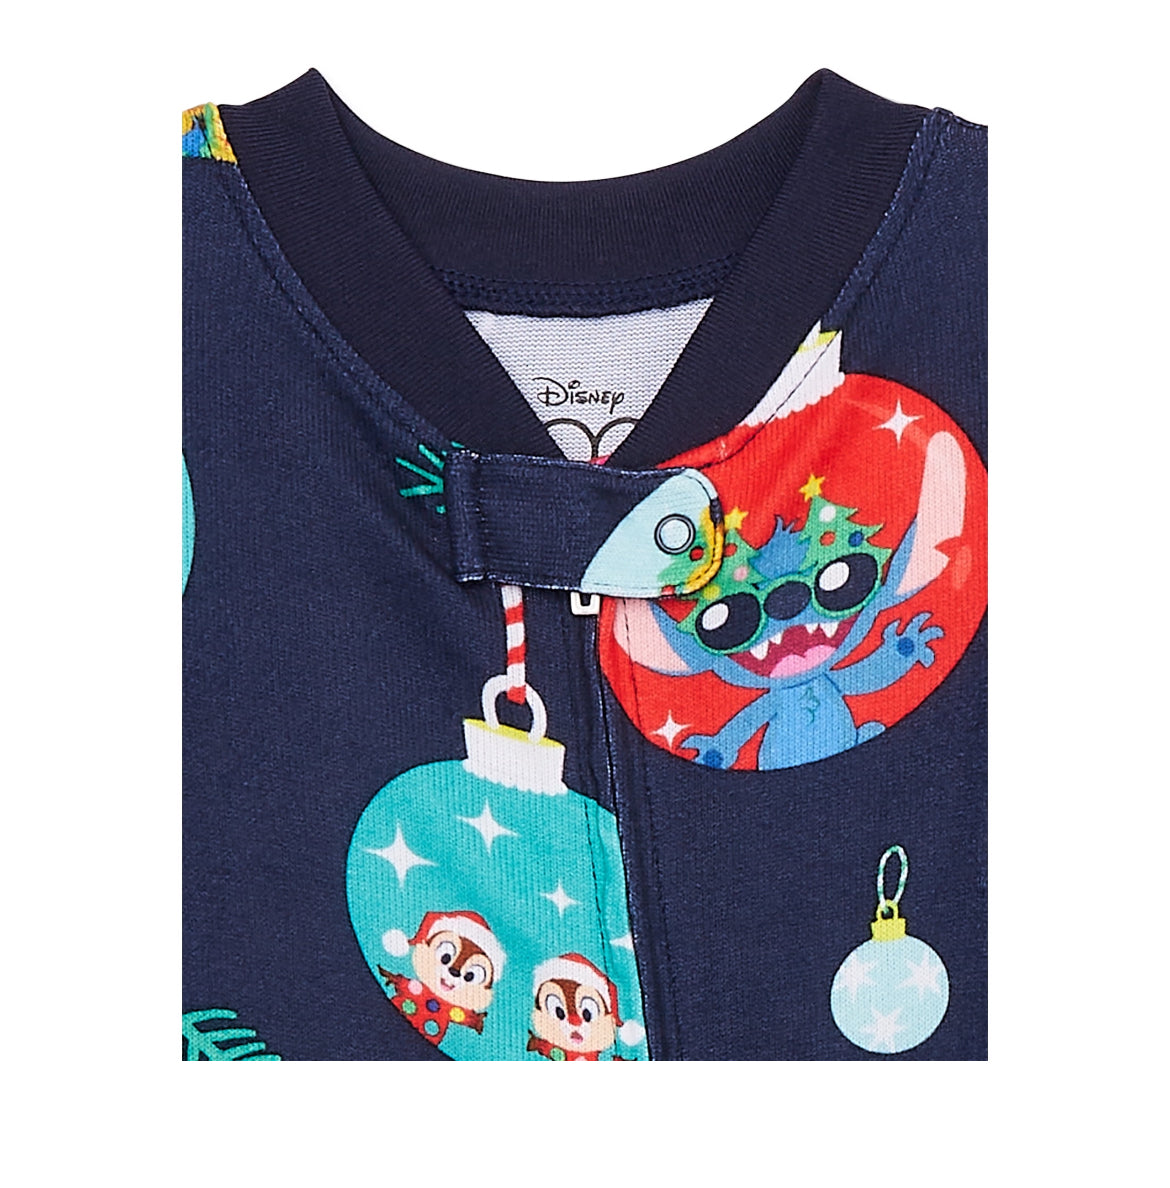 Disney’s 100th Anniversary Infant One-Piece Matching Family Pajamas